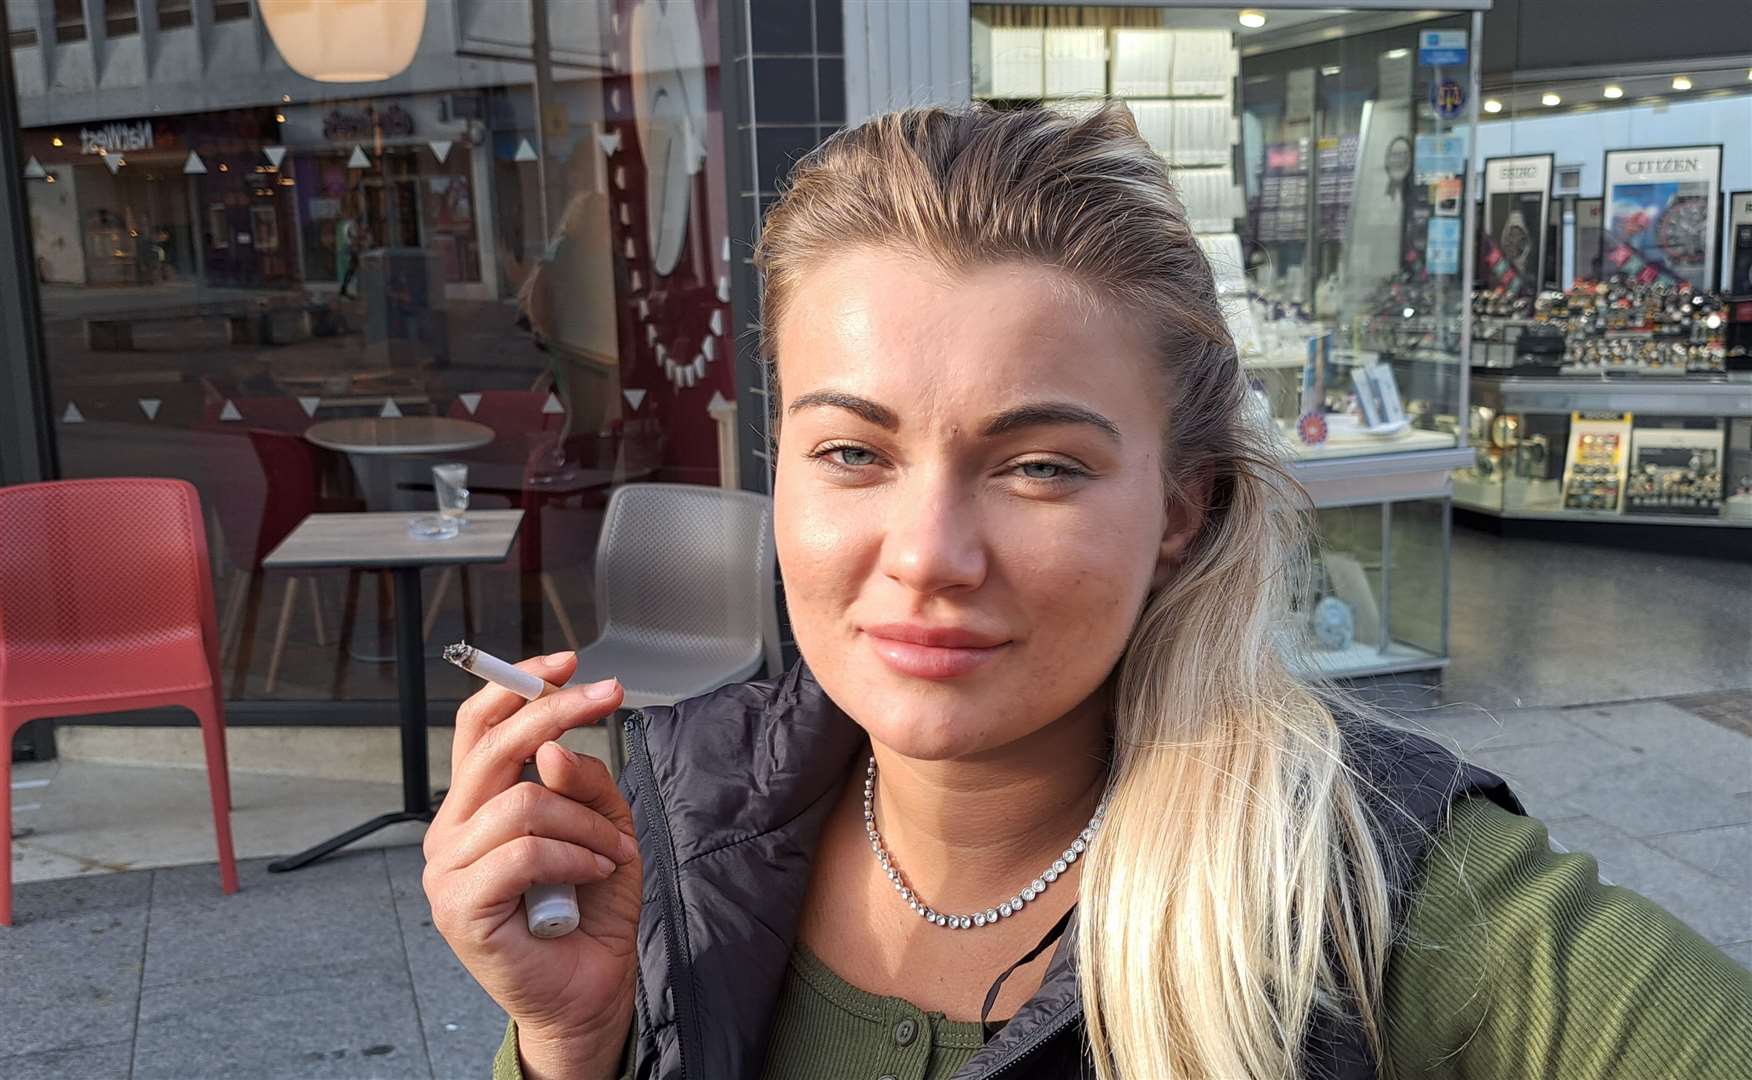 Josie Rossiter says people should be able to smoke if they want